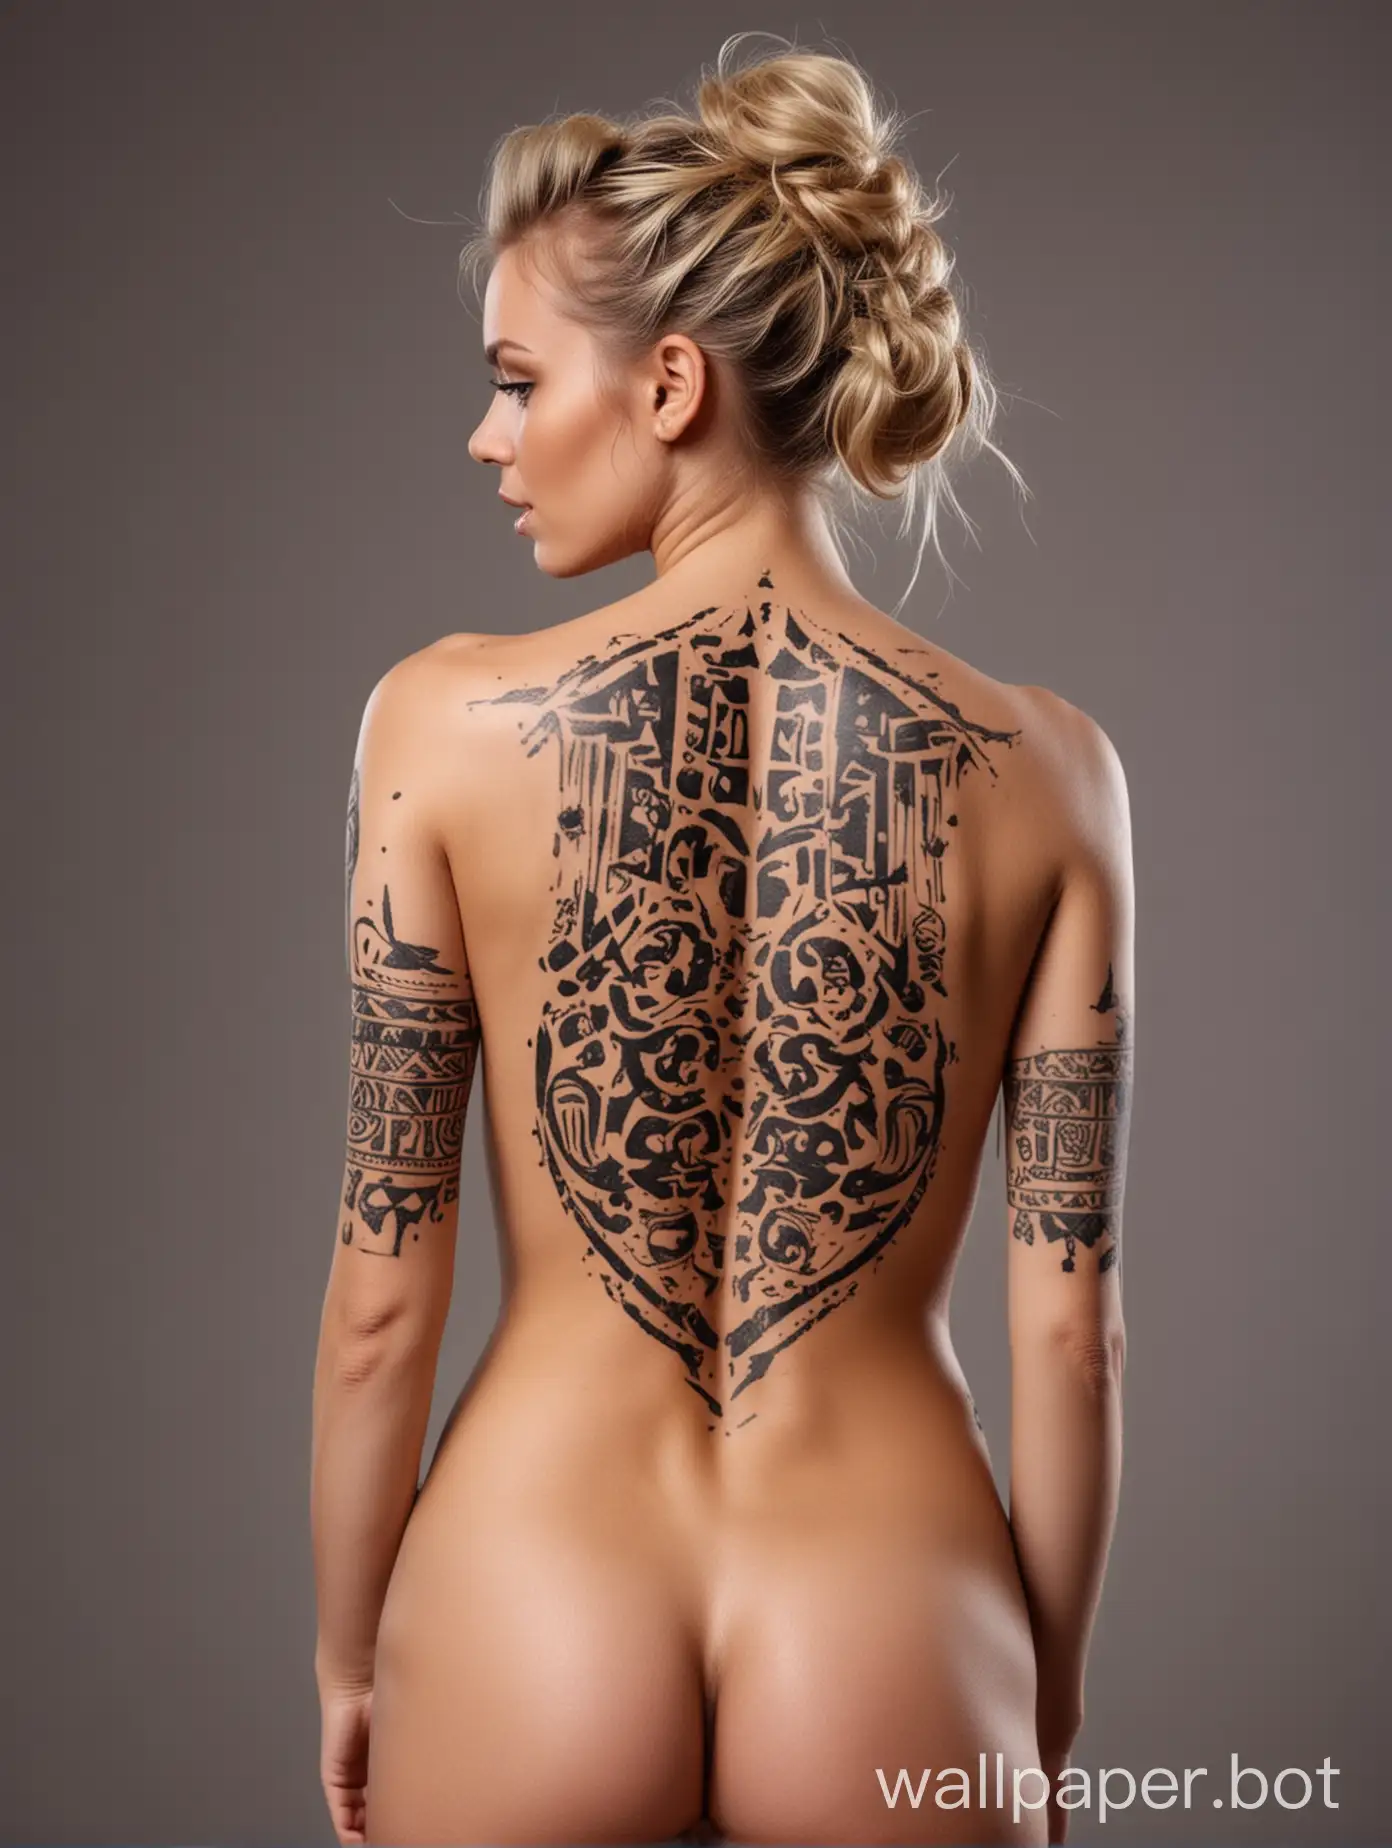 Captivating back view portrait of blonde woman naked her body covered with tribal tattoos, messy bun hairstyle, shy pose